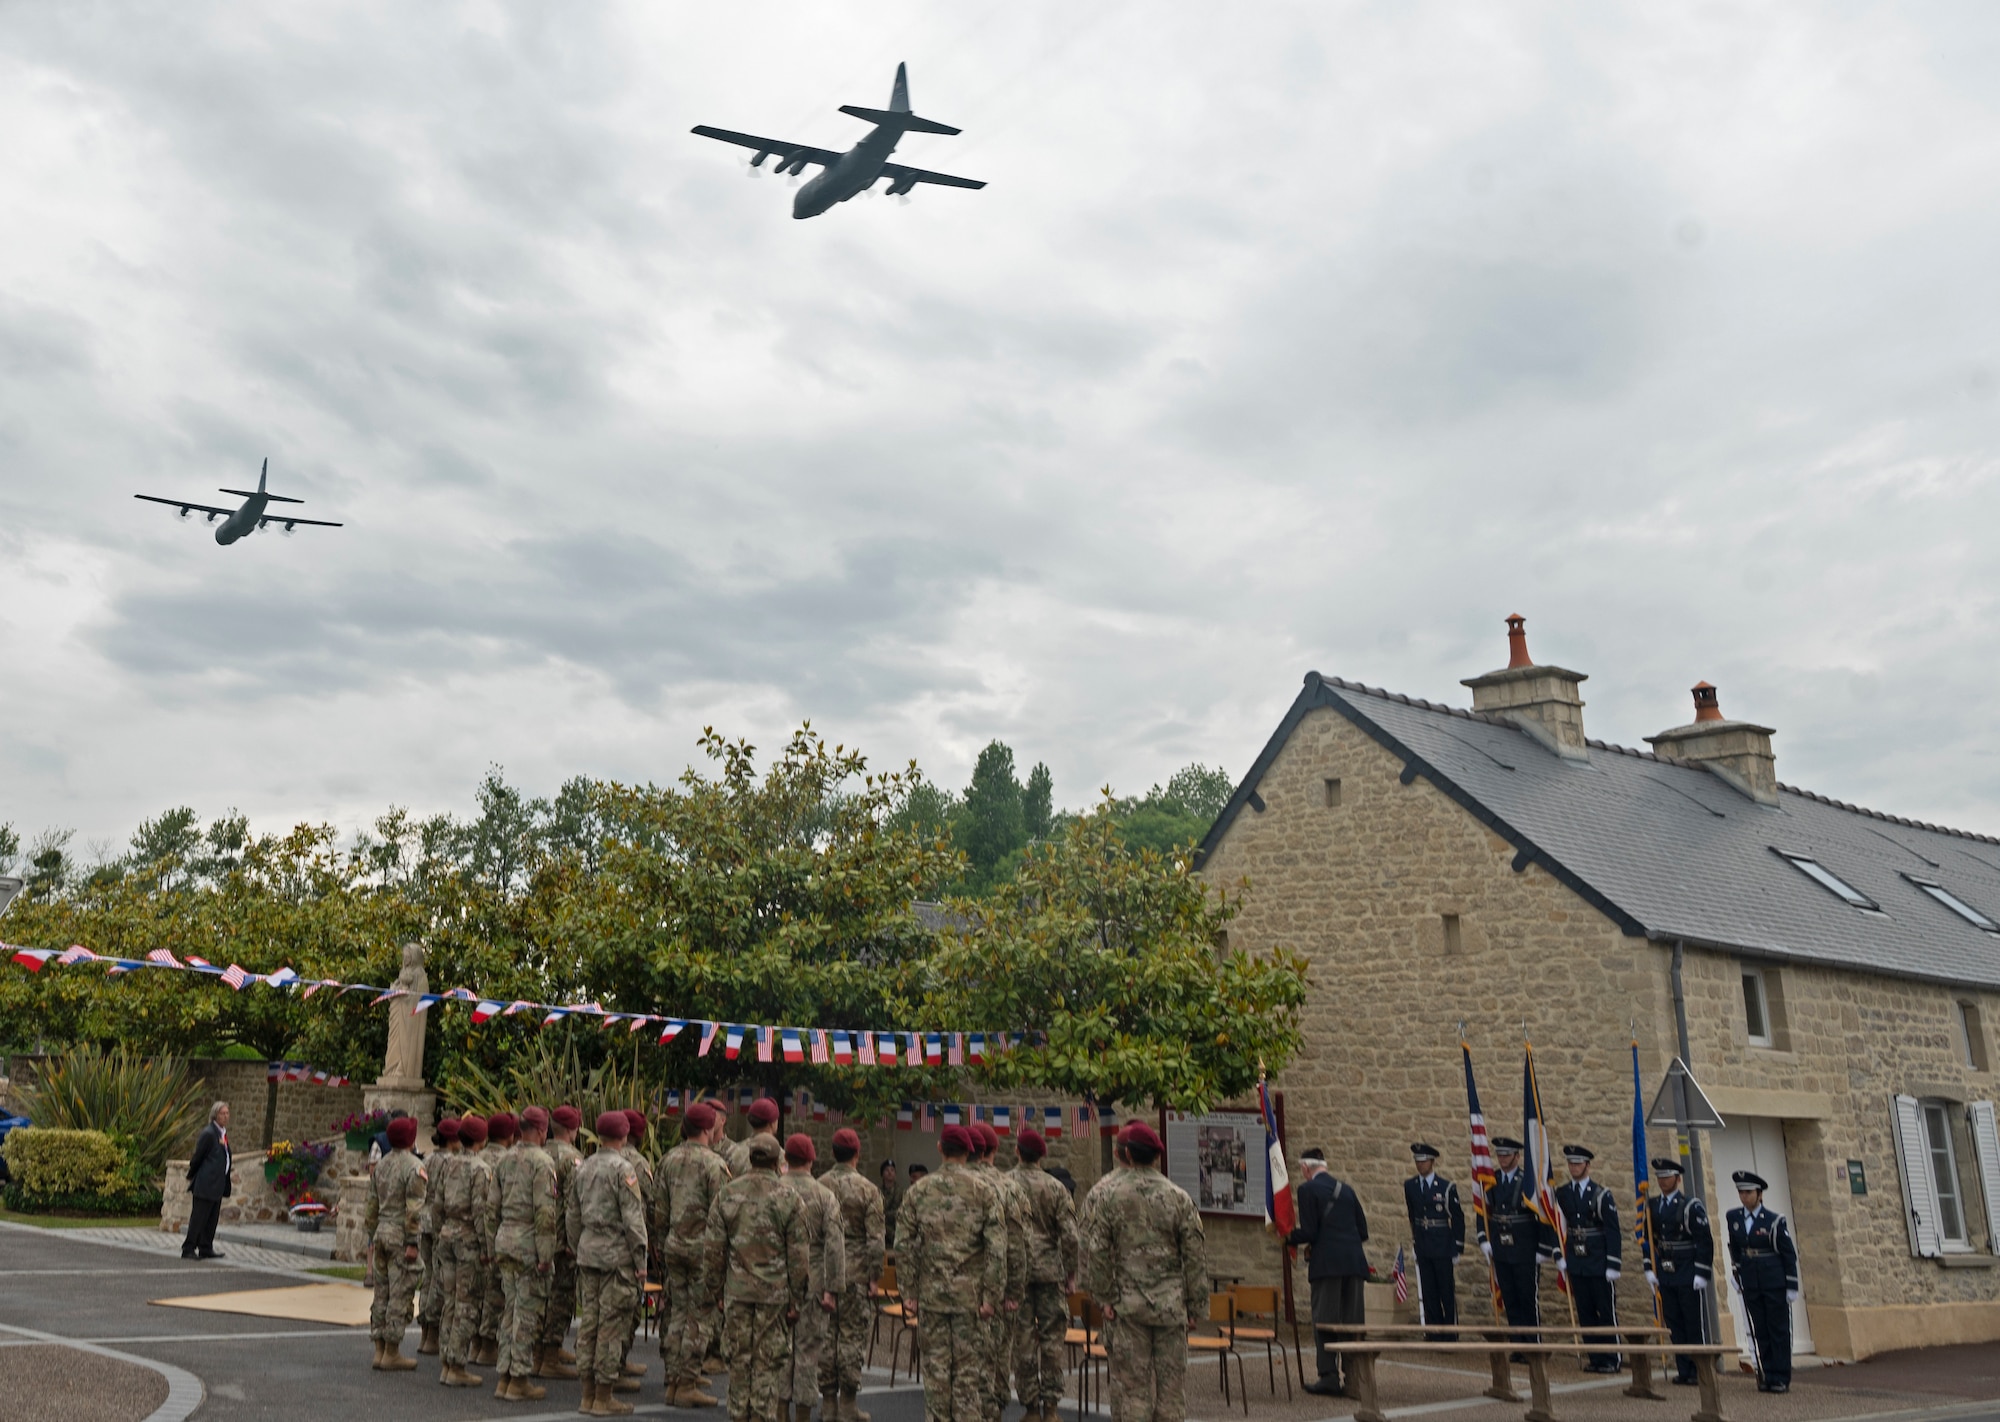 Two C-130J Super Hercules aircraft out of Ramstein Air Base, Germany, fly over Negreville, France during a D-Day ceremony June 3, 2022. On June 6, 1944 a Douglas C-47 Skytrain aircraft crashed near Negreville after being hit by anti-aircraft fire and all aircrew members and paratroopers were forced to jump 12 miles away from their intended drop zone. (U.S. Air Force photo by Senior Airman Thomas Karol)